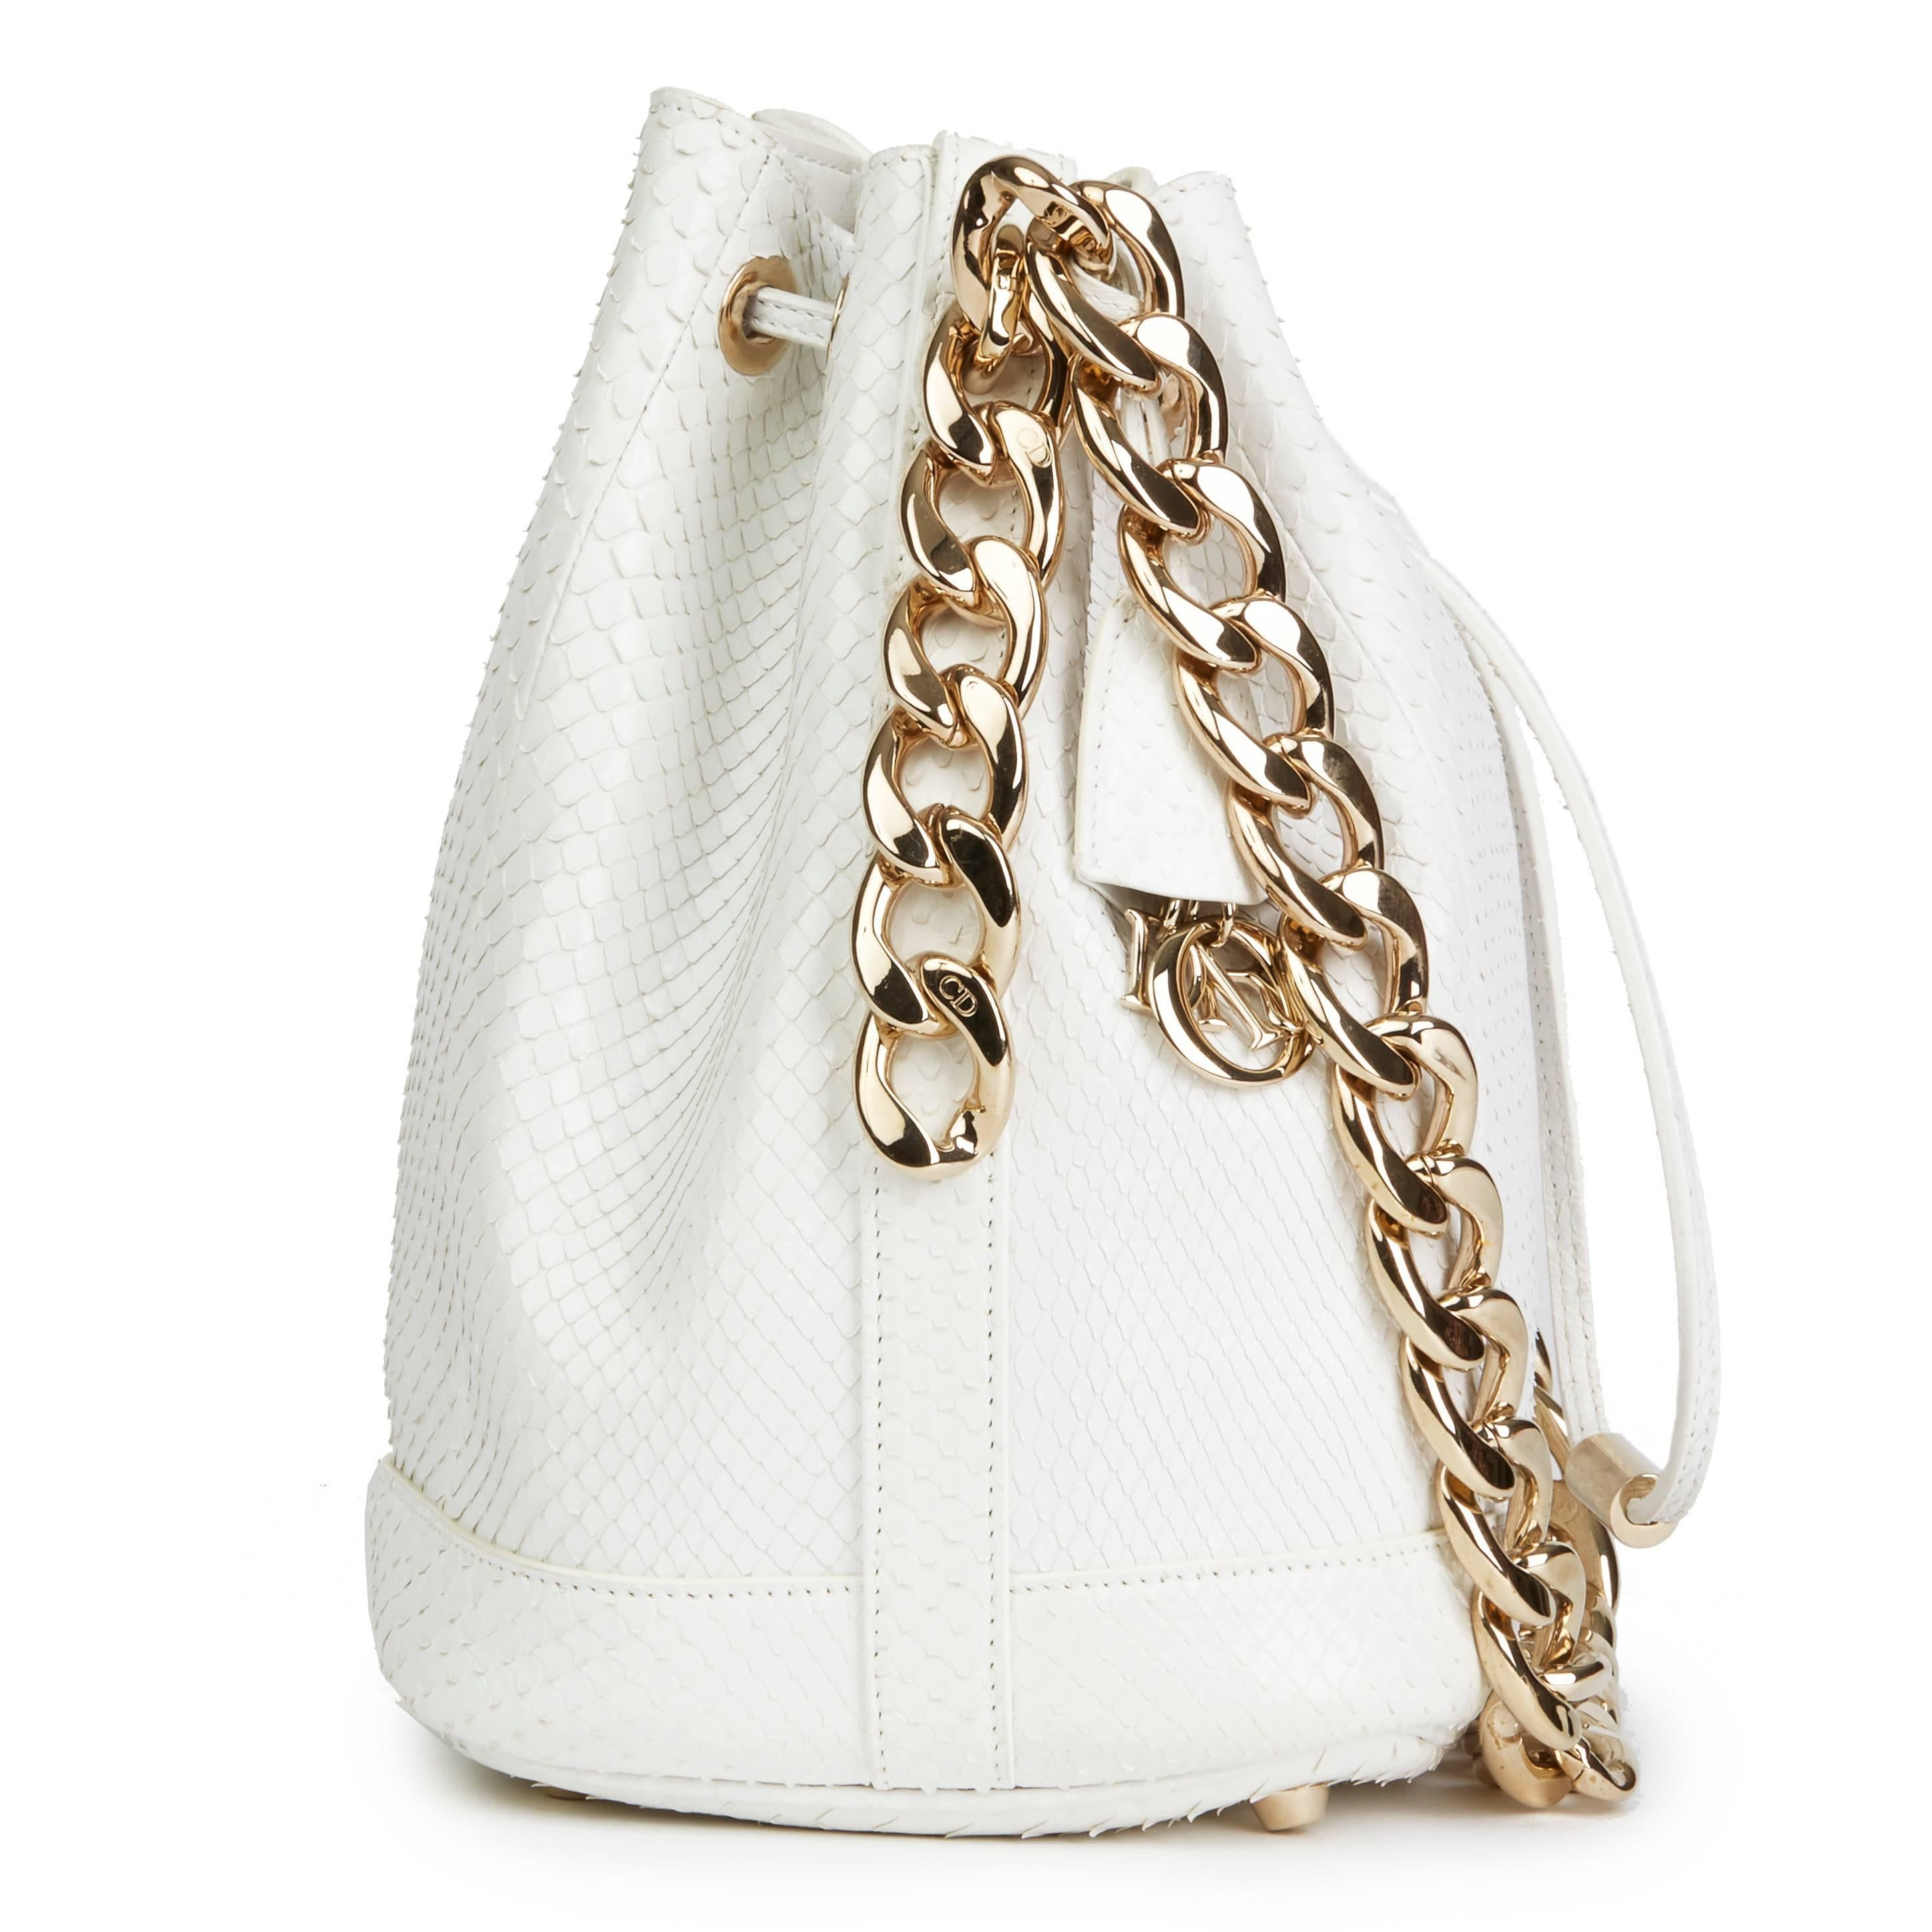 CHRISTIAN DIOR
White Python Leather Small Bubble Bucket Bag

Reference: HB1865
Serial Number: 09-BO-1115
Age (Circa): 2015
Authenticity Details: Date Stamp (Made in Italy)
Gender: Ladies
Type: Shoulder

Colour: White
Hardware: Gold
Material(s):